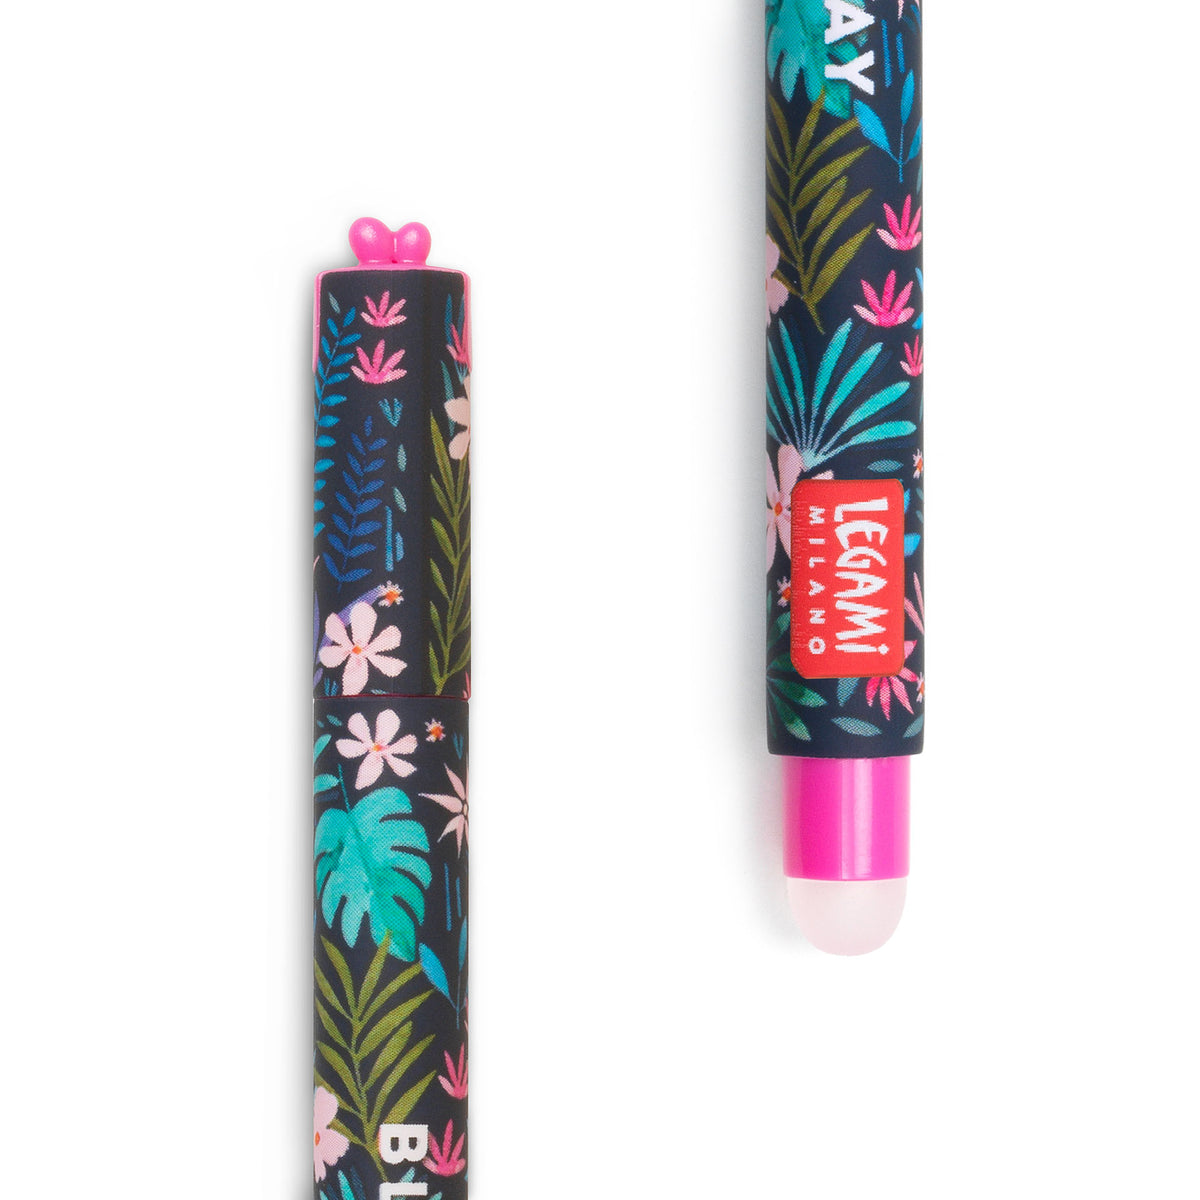 Image of an erasable pen lid and rubber with a tropical foliage pattern.